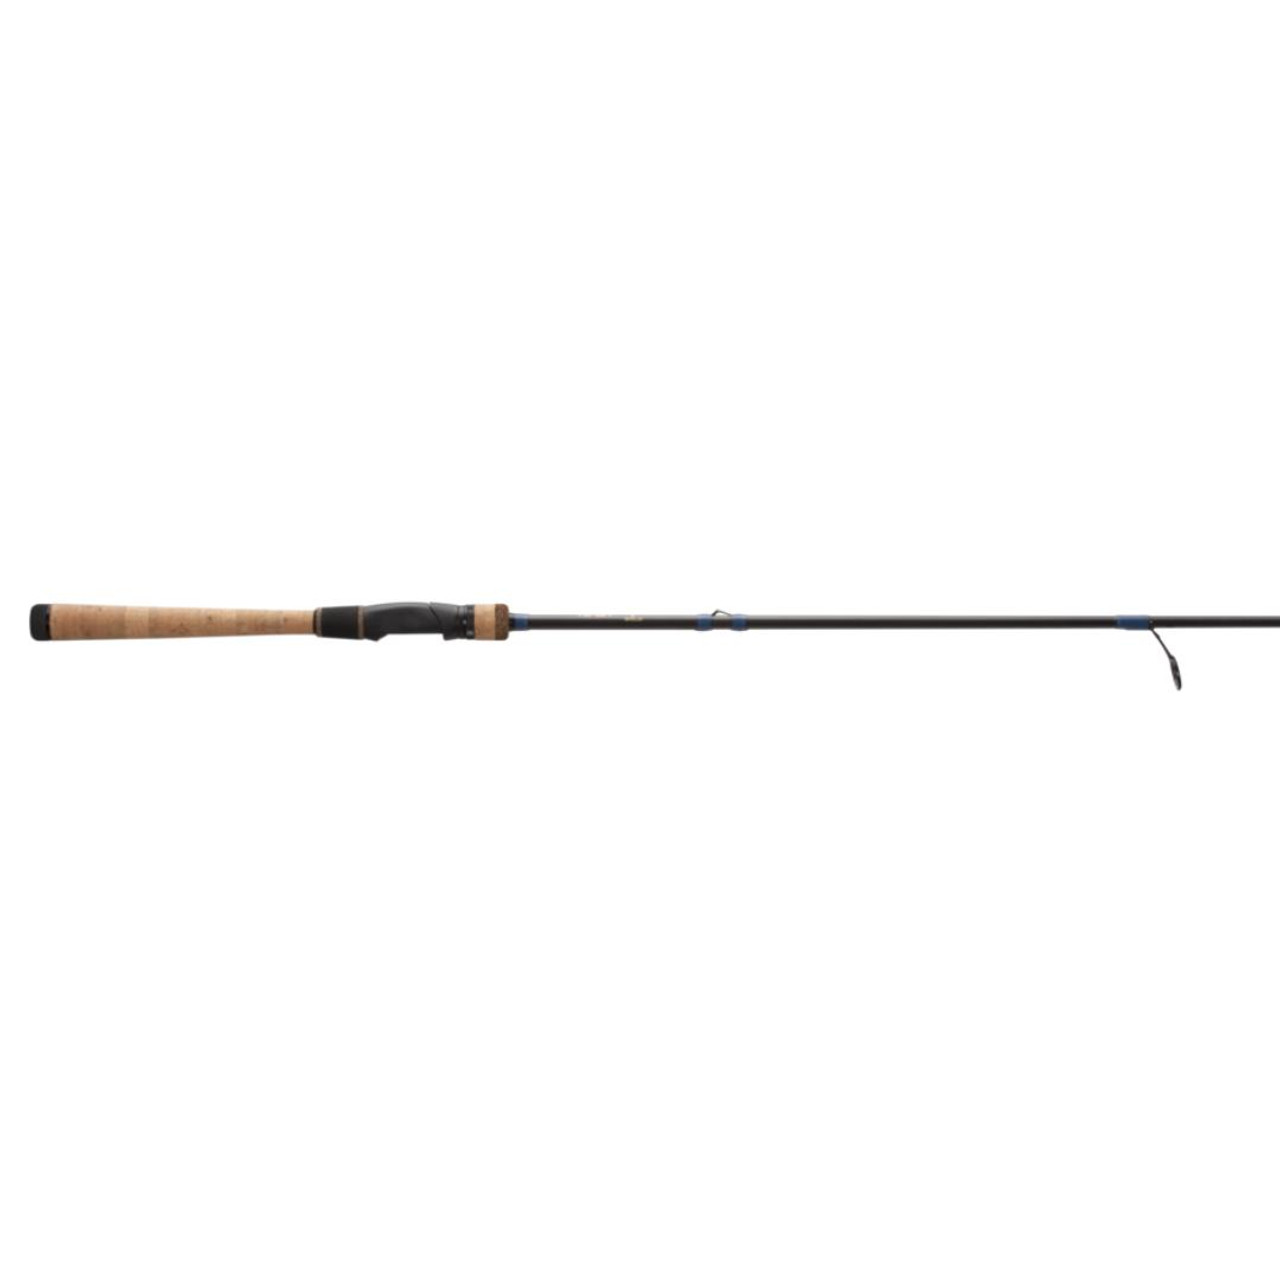 13 Fishing Defy Gold Spinning Rod 4'9 MH 2pc